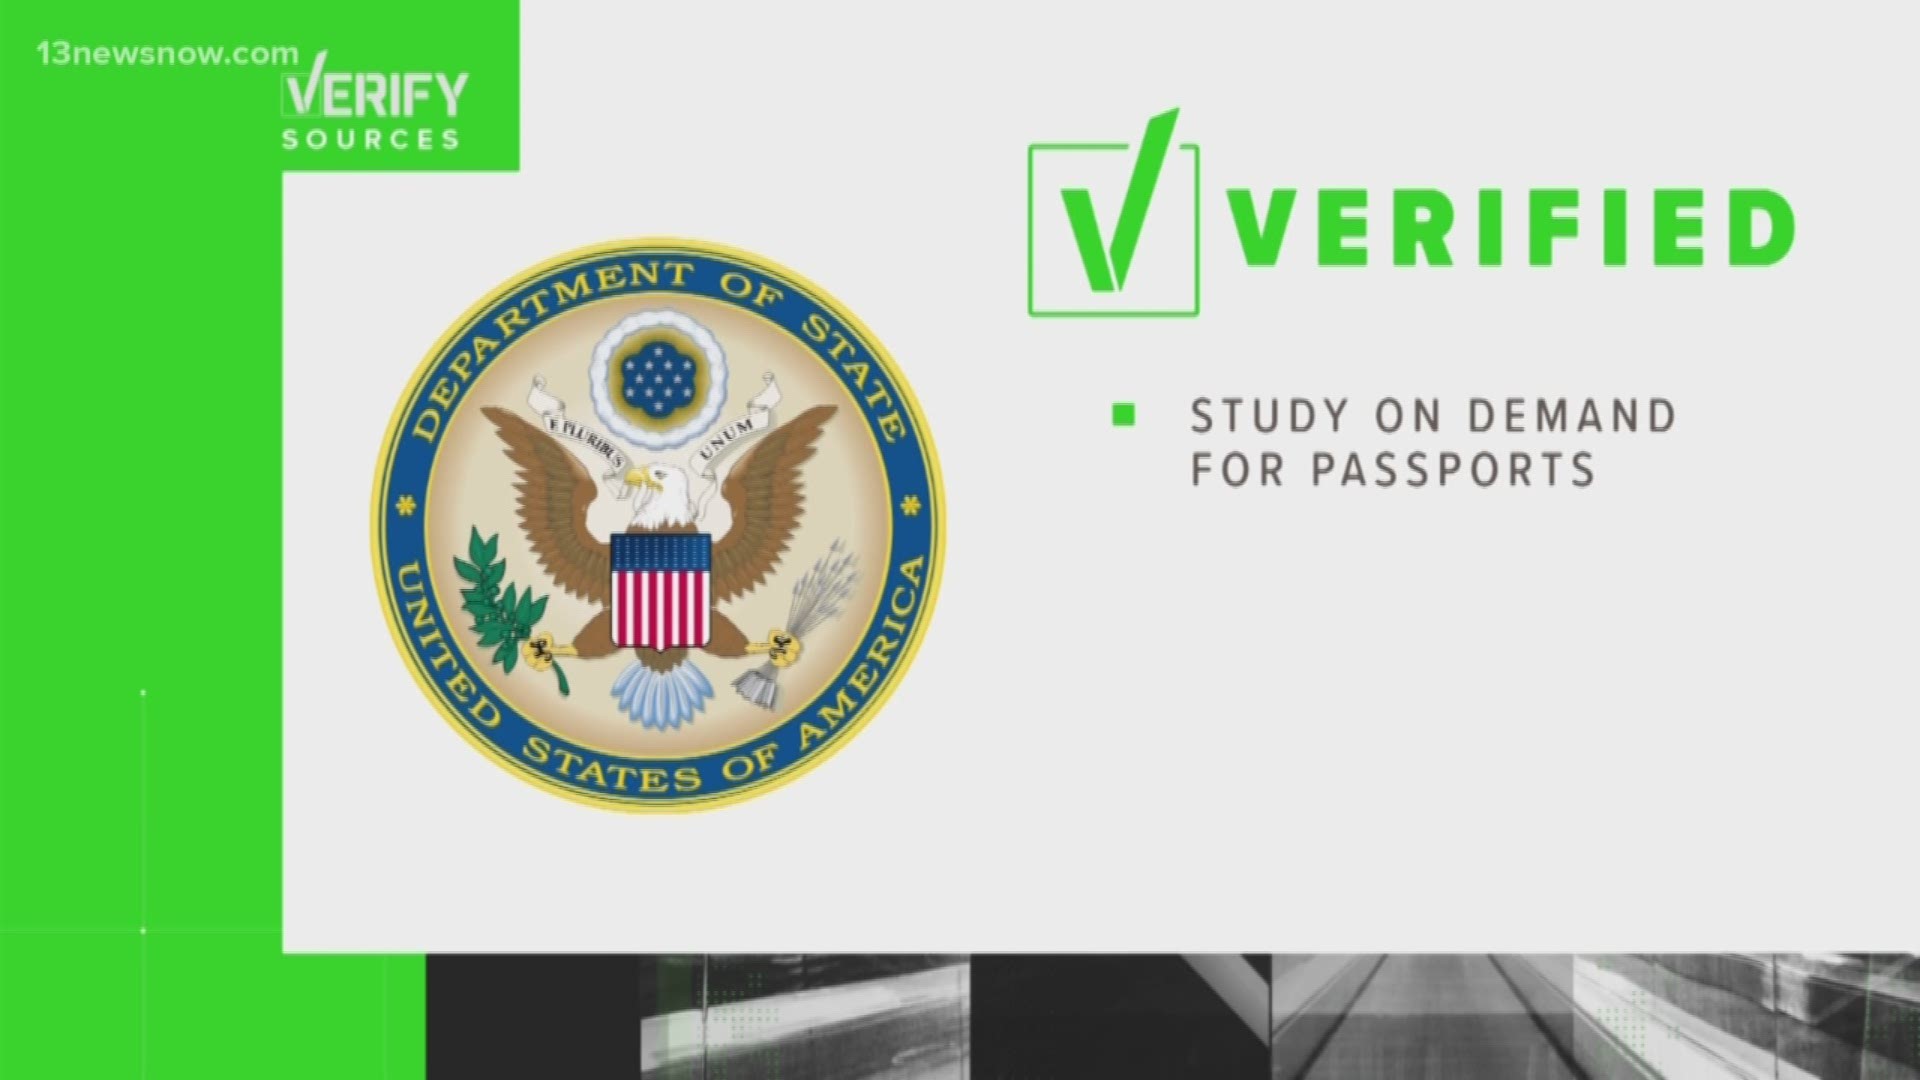 VERIFY: Passport Study. Is it real or a scam?